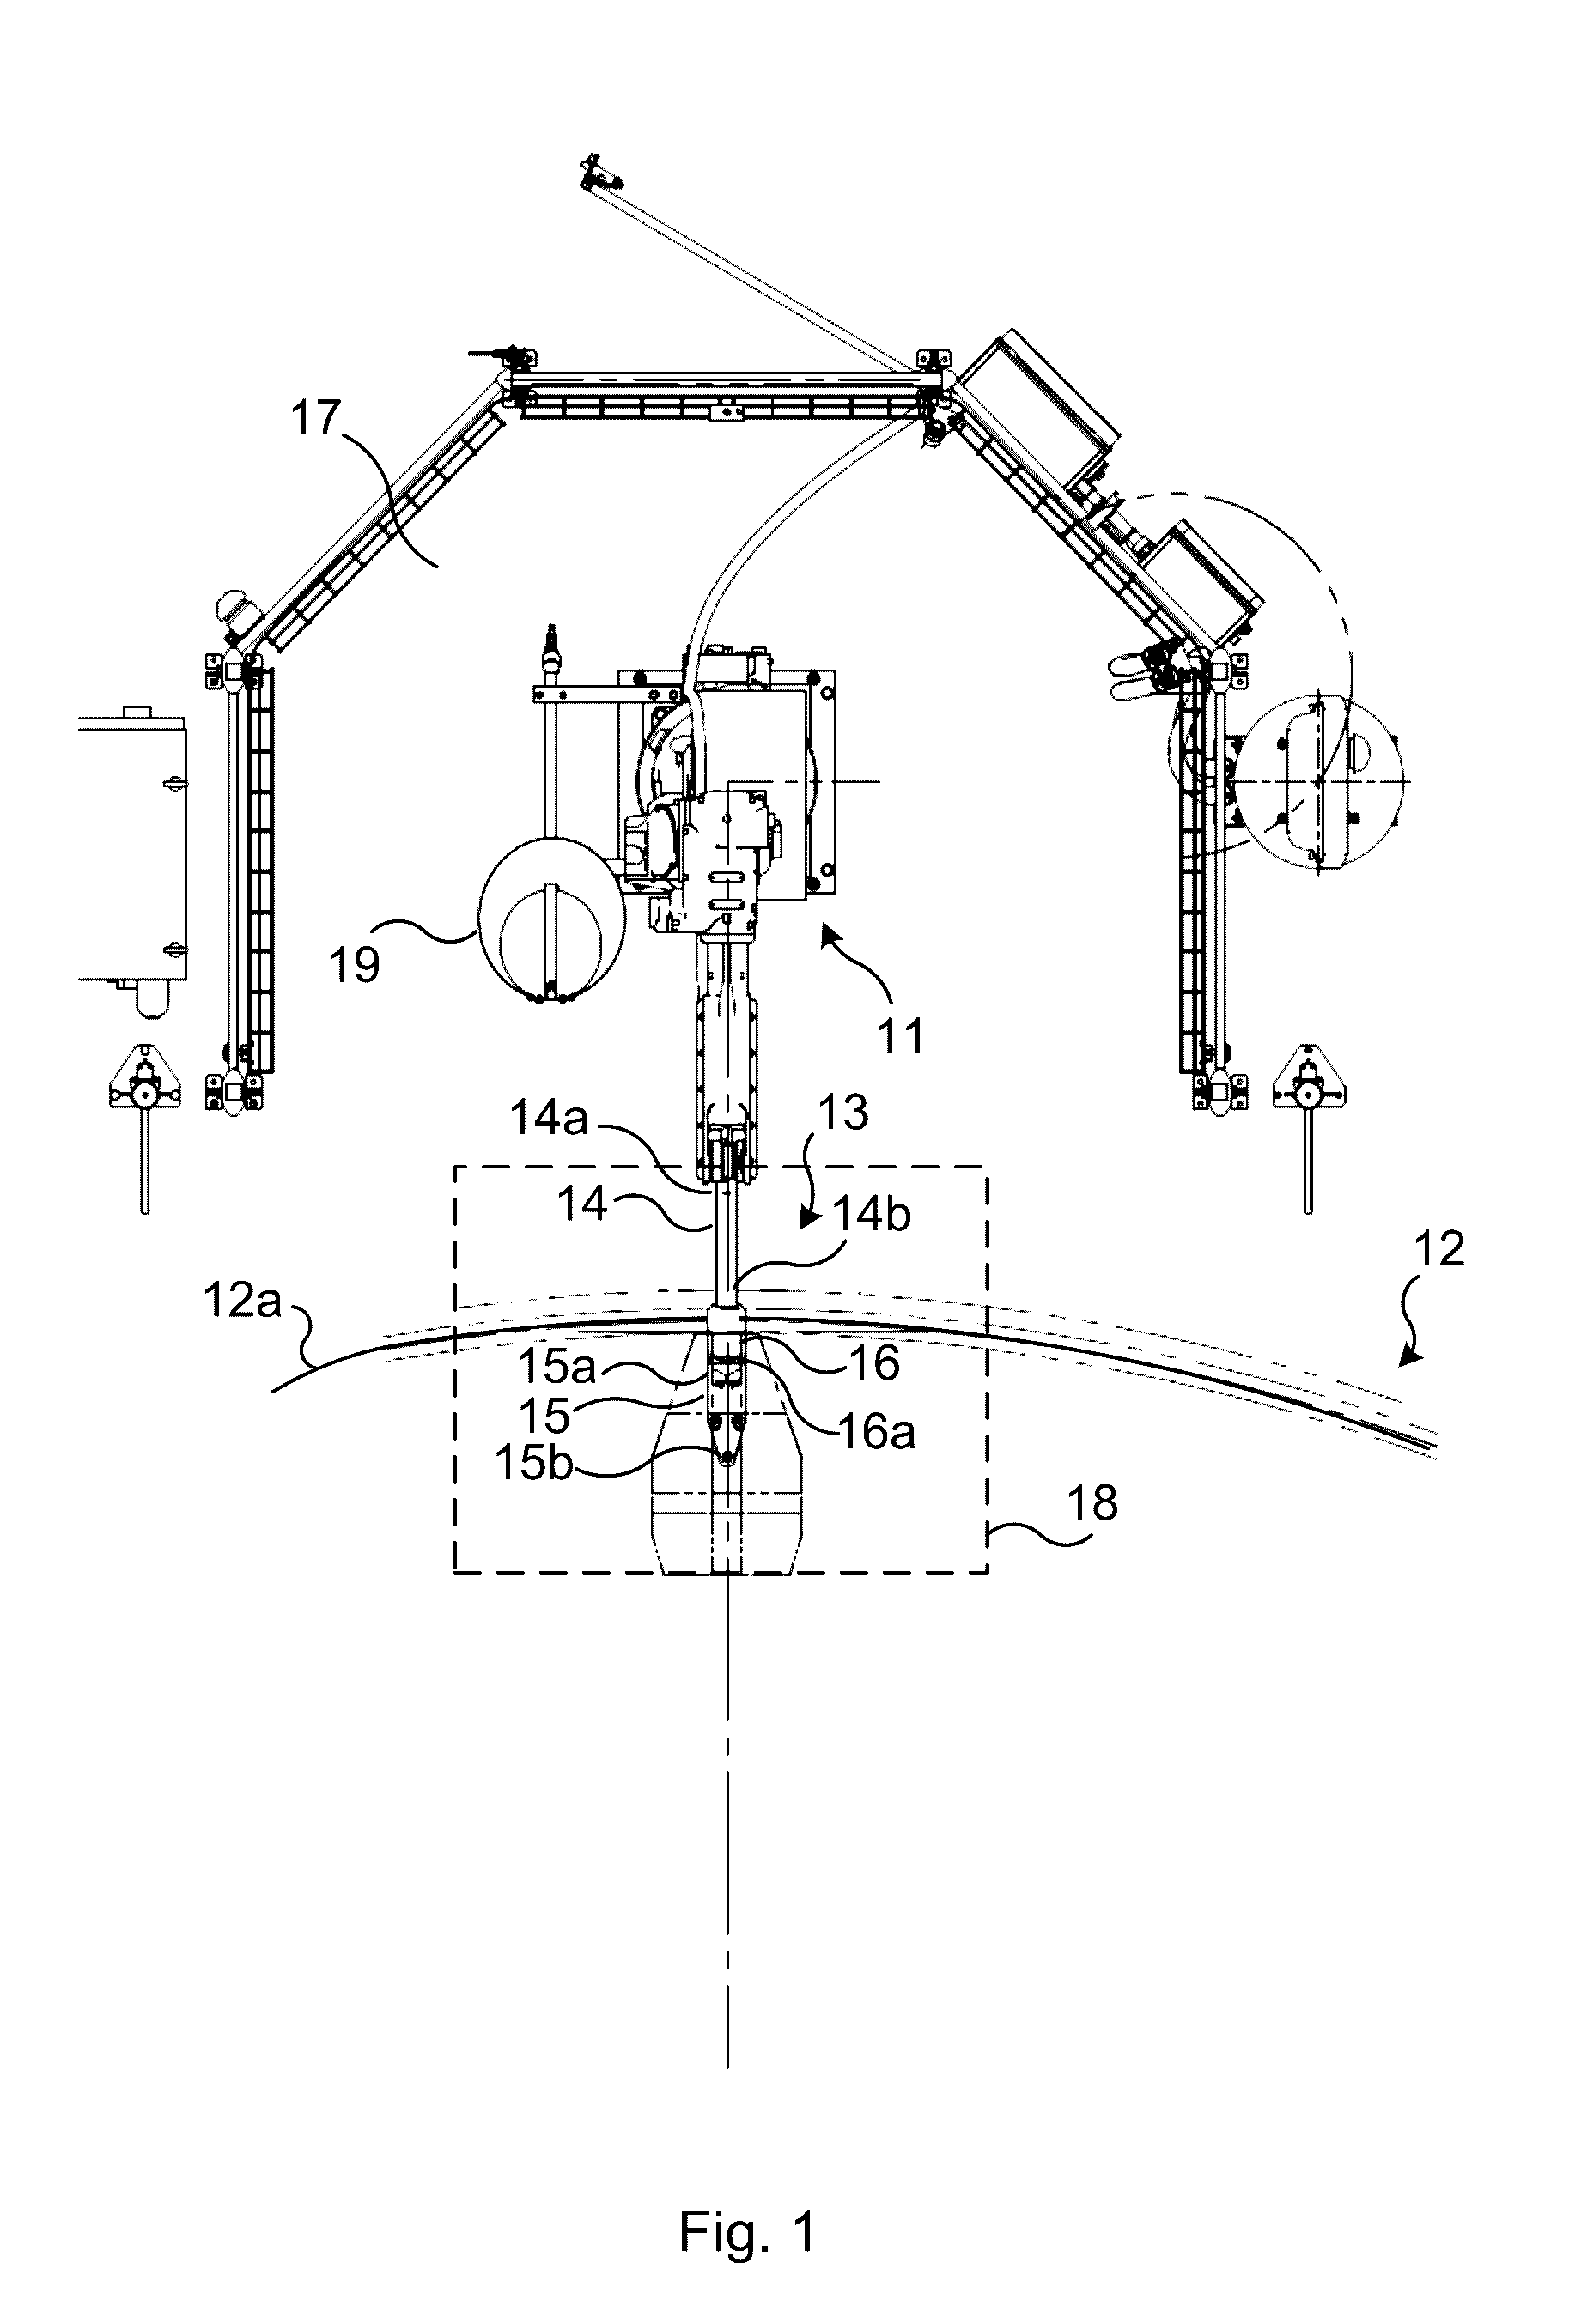 End effector, robot, and rotary milking system